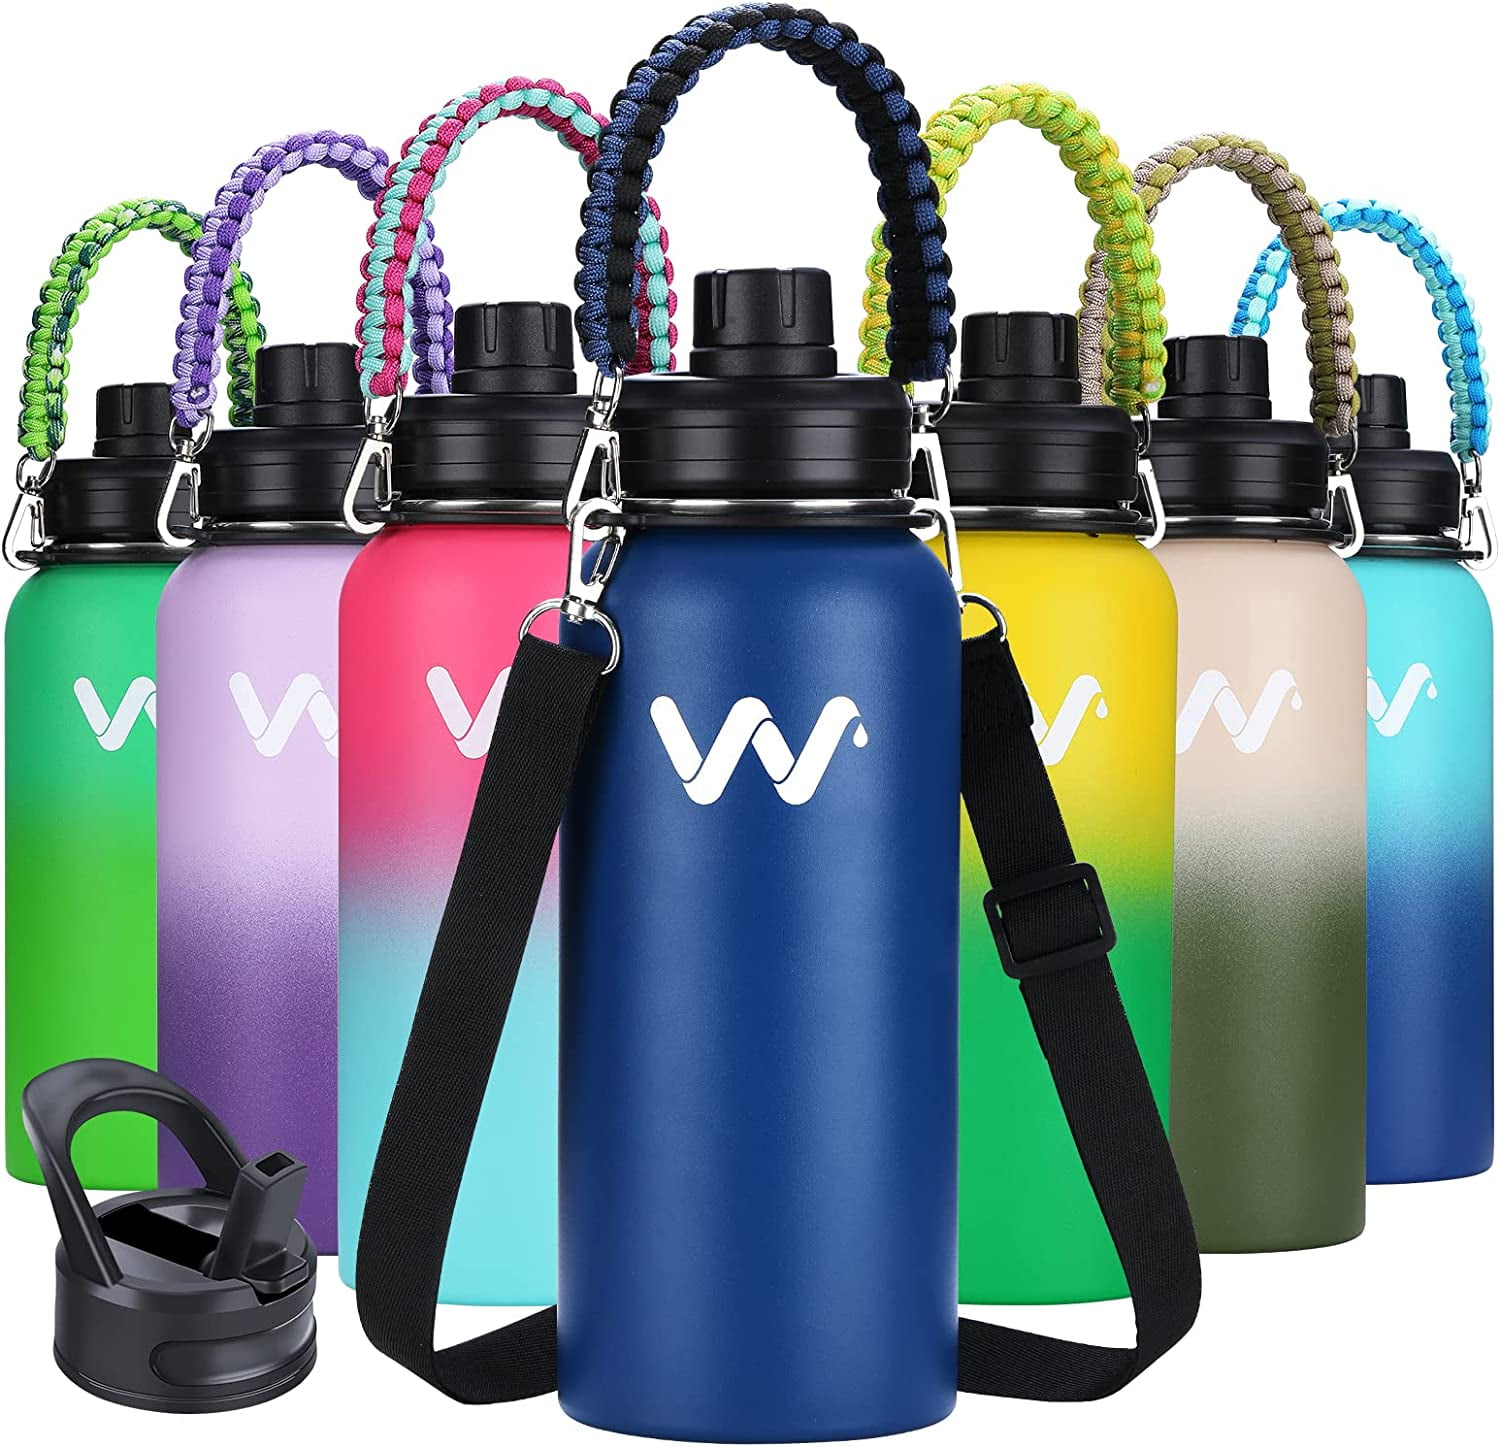 Water Bottle with Straw Reusable Water Bottle BPA-Free 32oz Water Bottles  with Straw Lid Leakproof T…See more Water Bottle with Straw Reusable Water